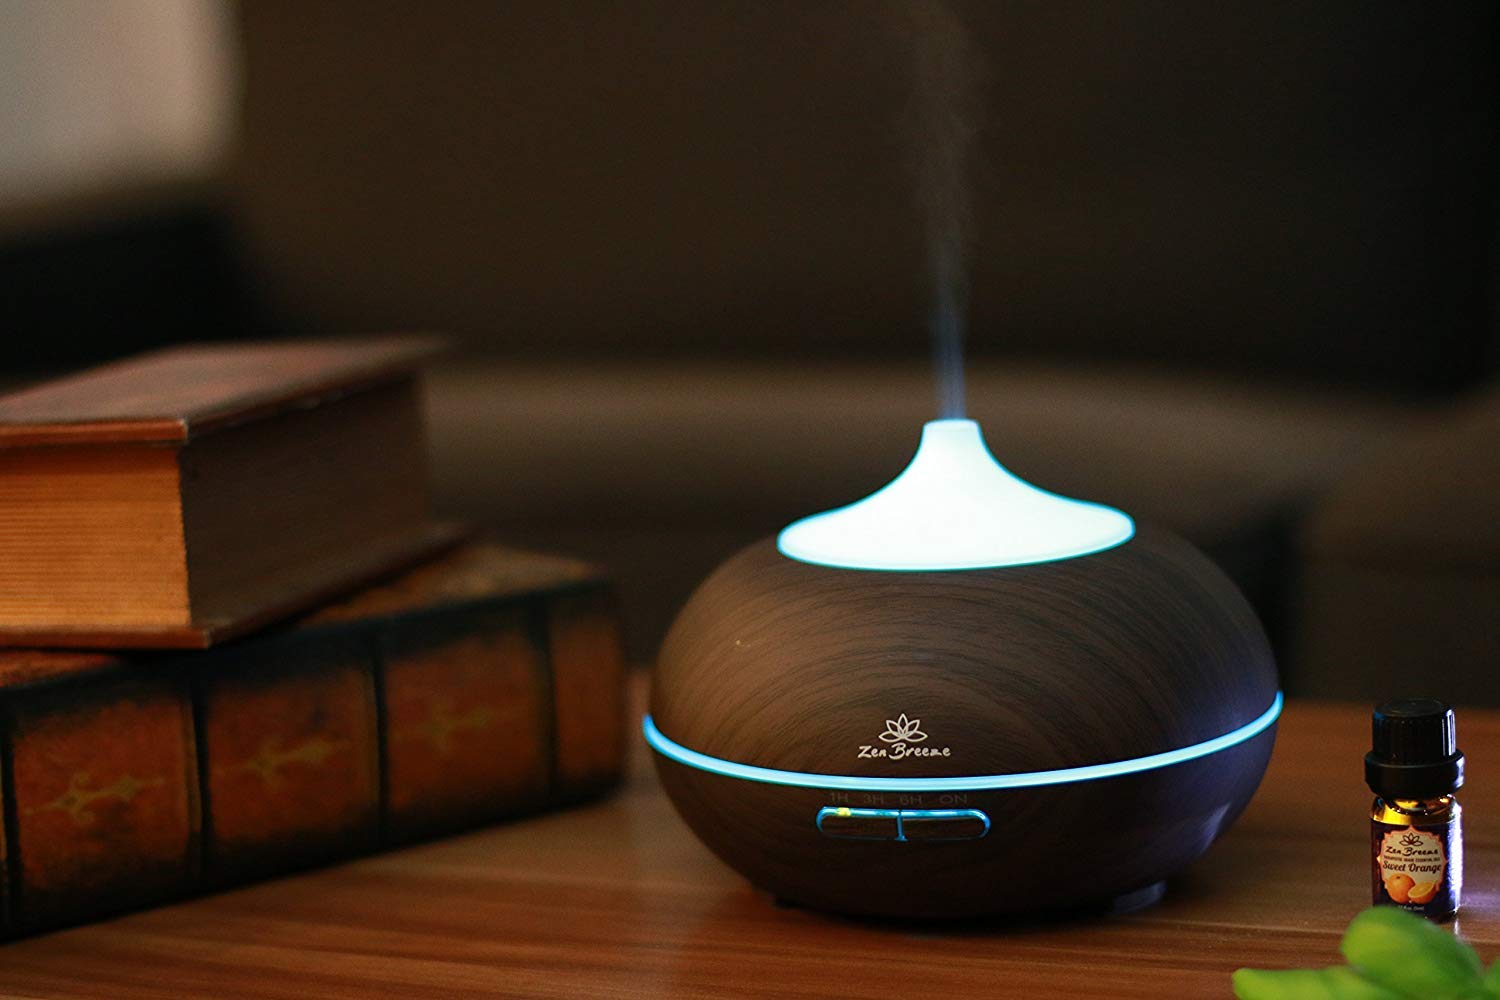 Essential Oil Diffuser Faux Dark Wood - Blue Light Aromatherapy Diffuser - Birthday Gift Edition - by Zen Breeze